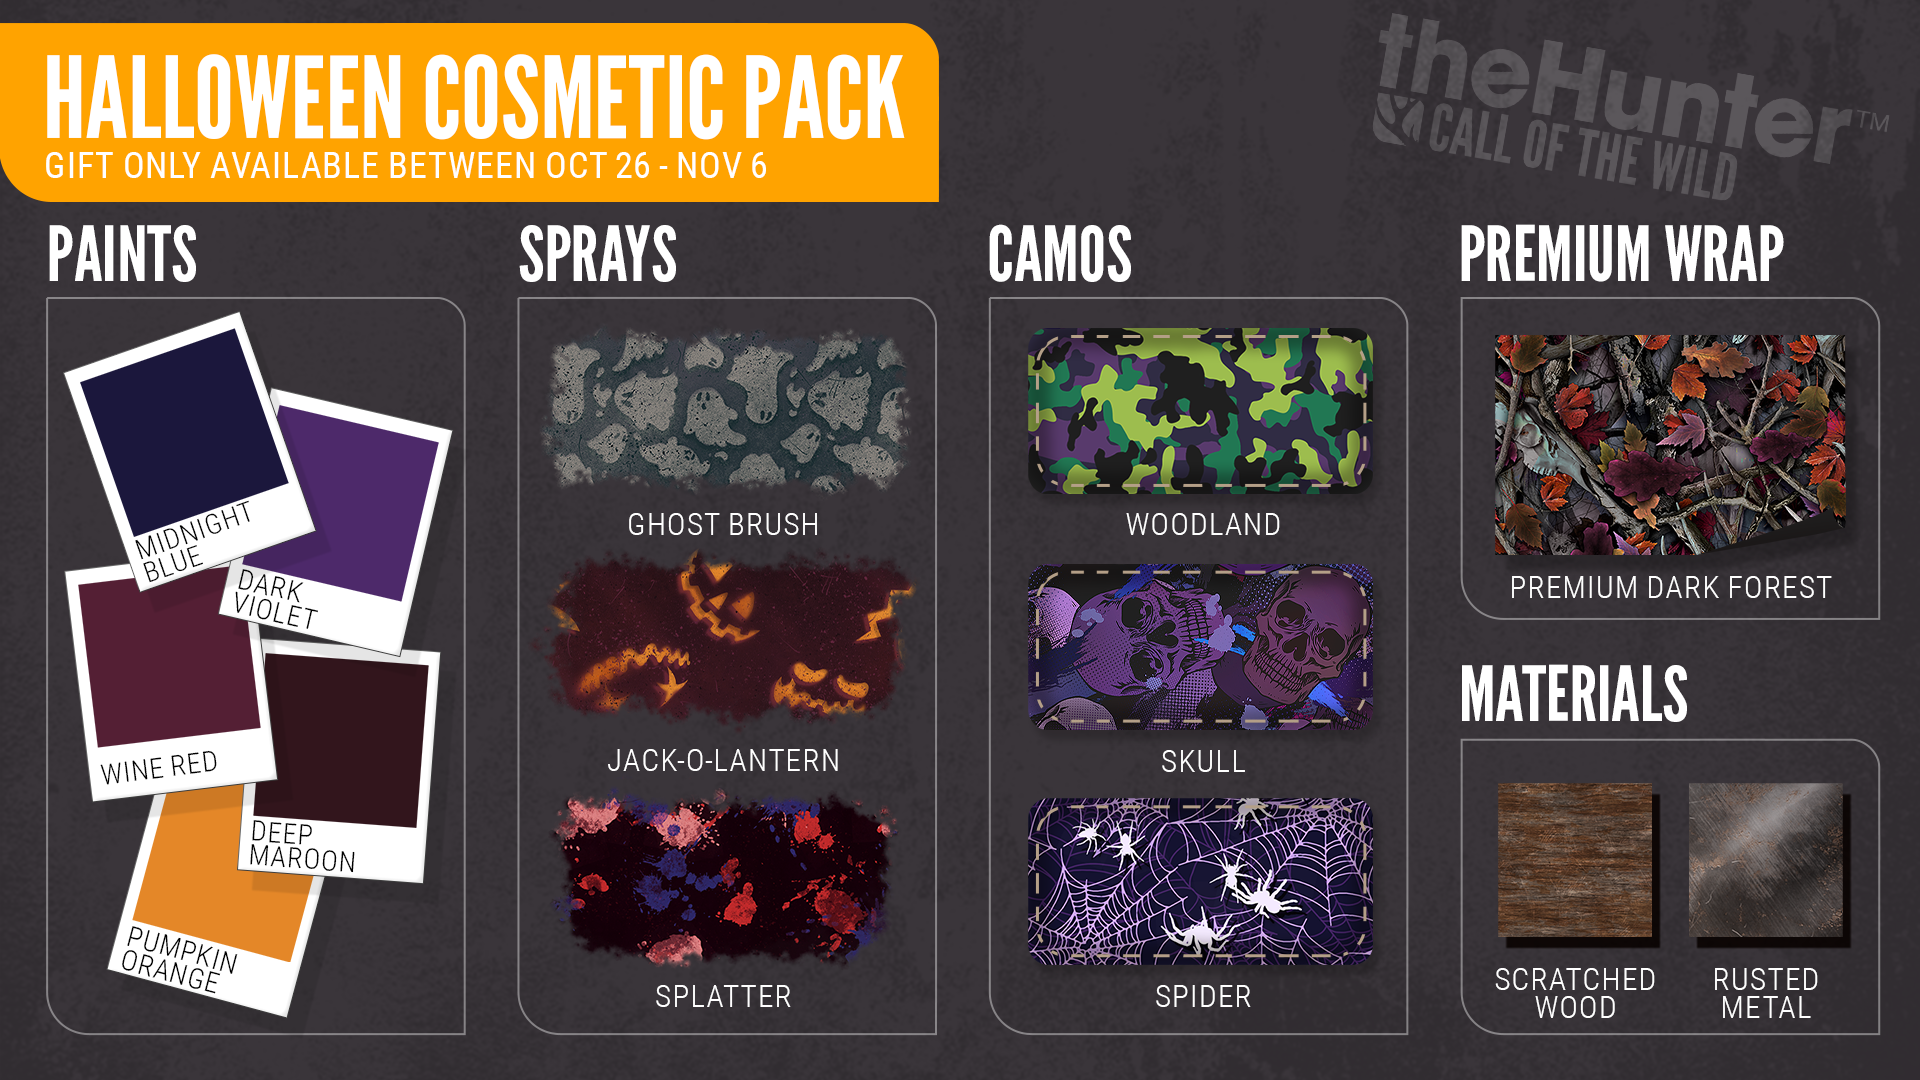 An infographic of the Halloween Cosmetic Pack and its contents: Halloween Midnight Blue Paint, Halloween Dark Violet Paint, Halloween Wine Red Paint, Halloween Deep Maroon Paint, Halloween Pumpkin Orange Paint, Halloween Ghost Brush Spray, Halloween Jack-O-Lantern Spray, Halloween Splatter Spray, Halloween Scratched Wood Material, Halloween Rusted Metal Material, Halloween Woodland Camo, Halloween Skull Camo, Halloween Spider Camo, Halloween Premium Dark Forest Wrap